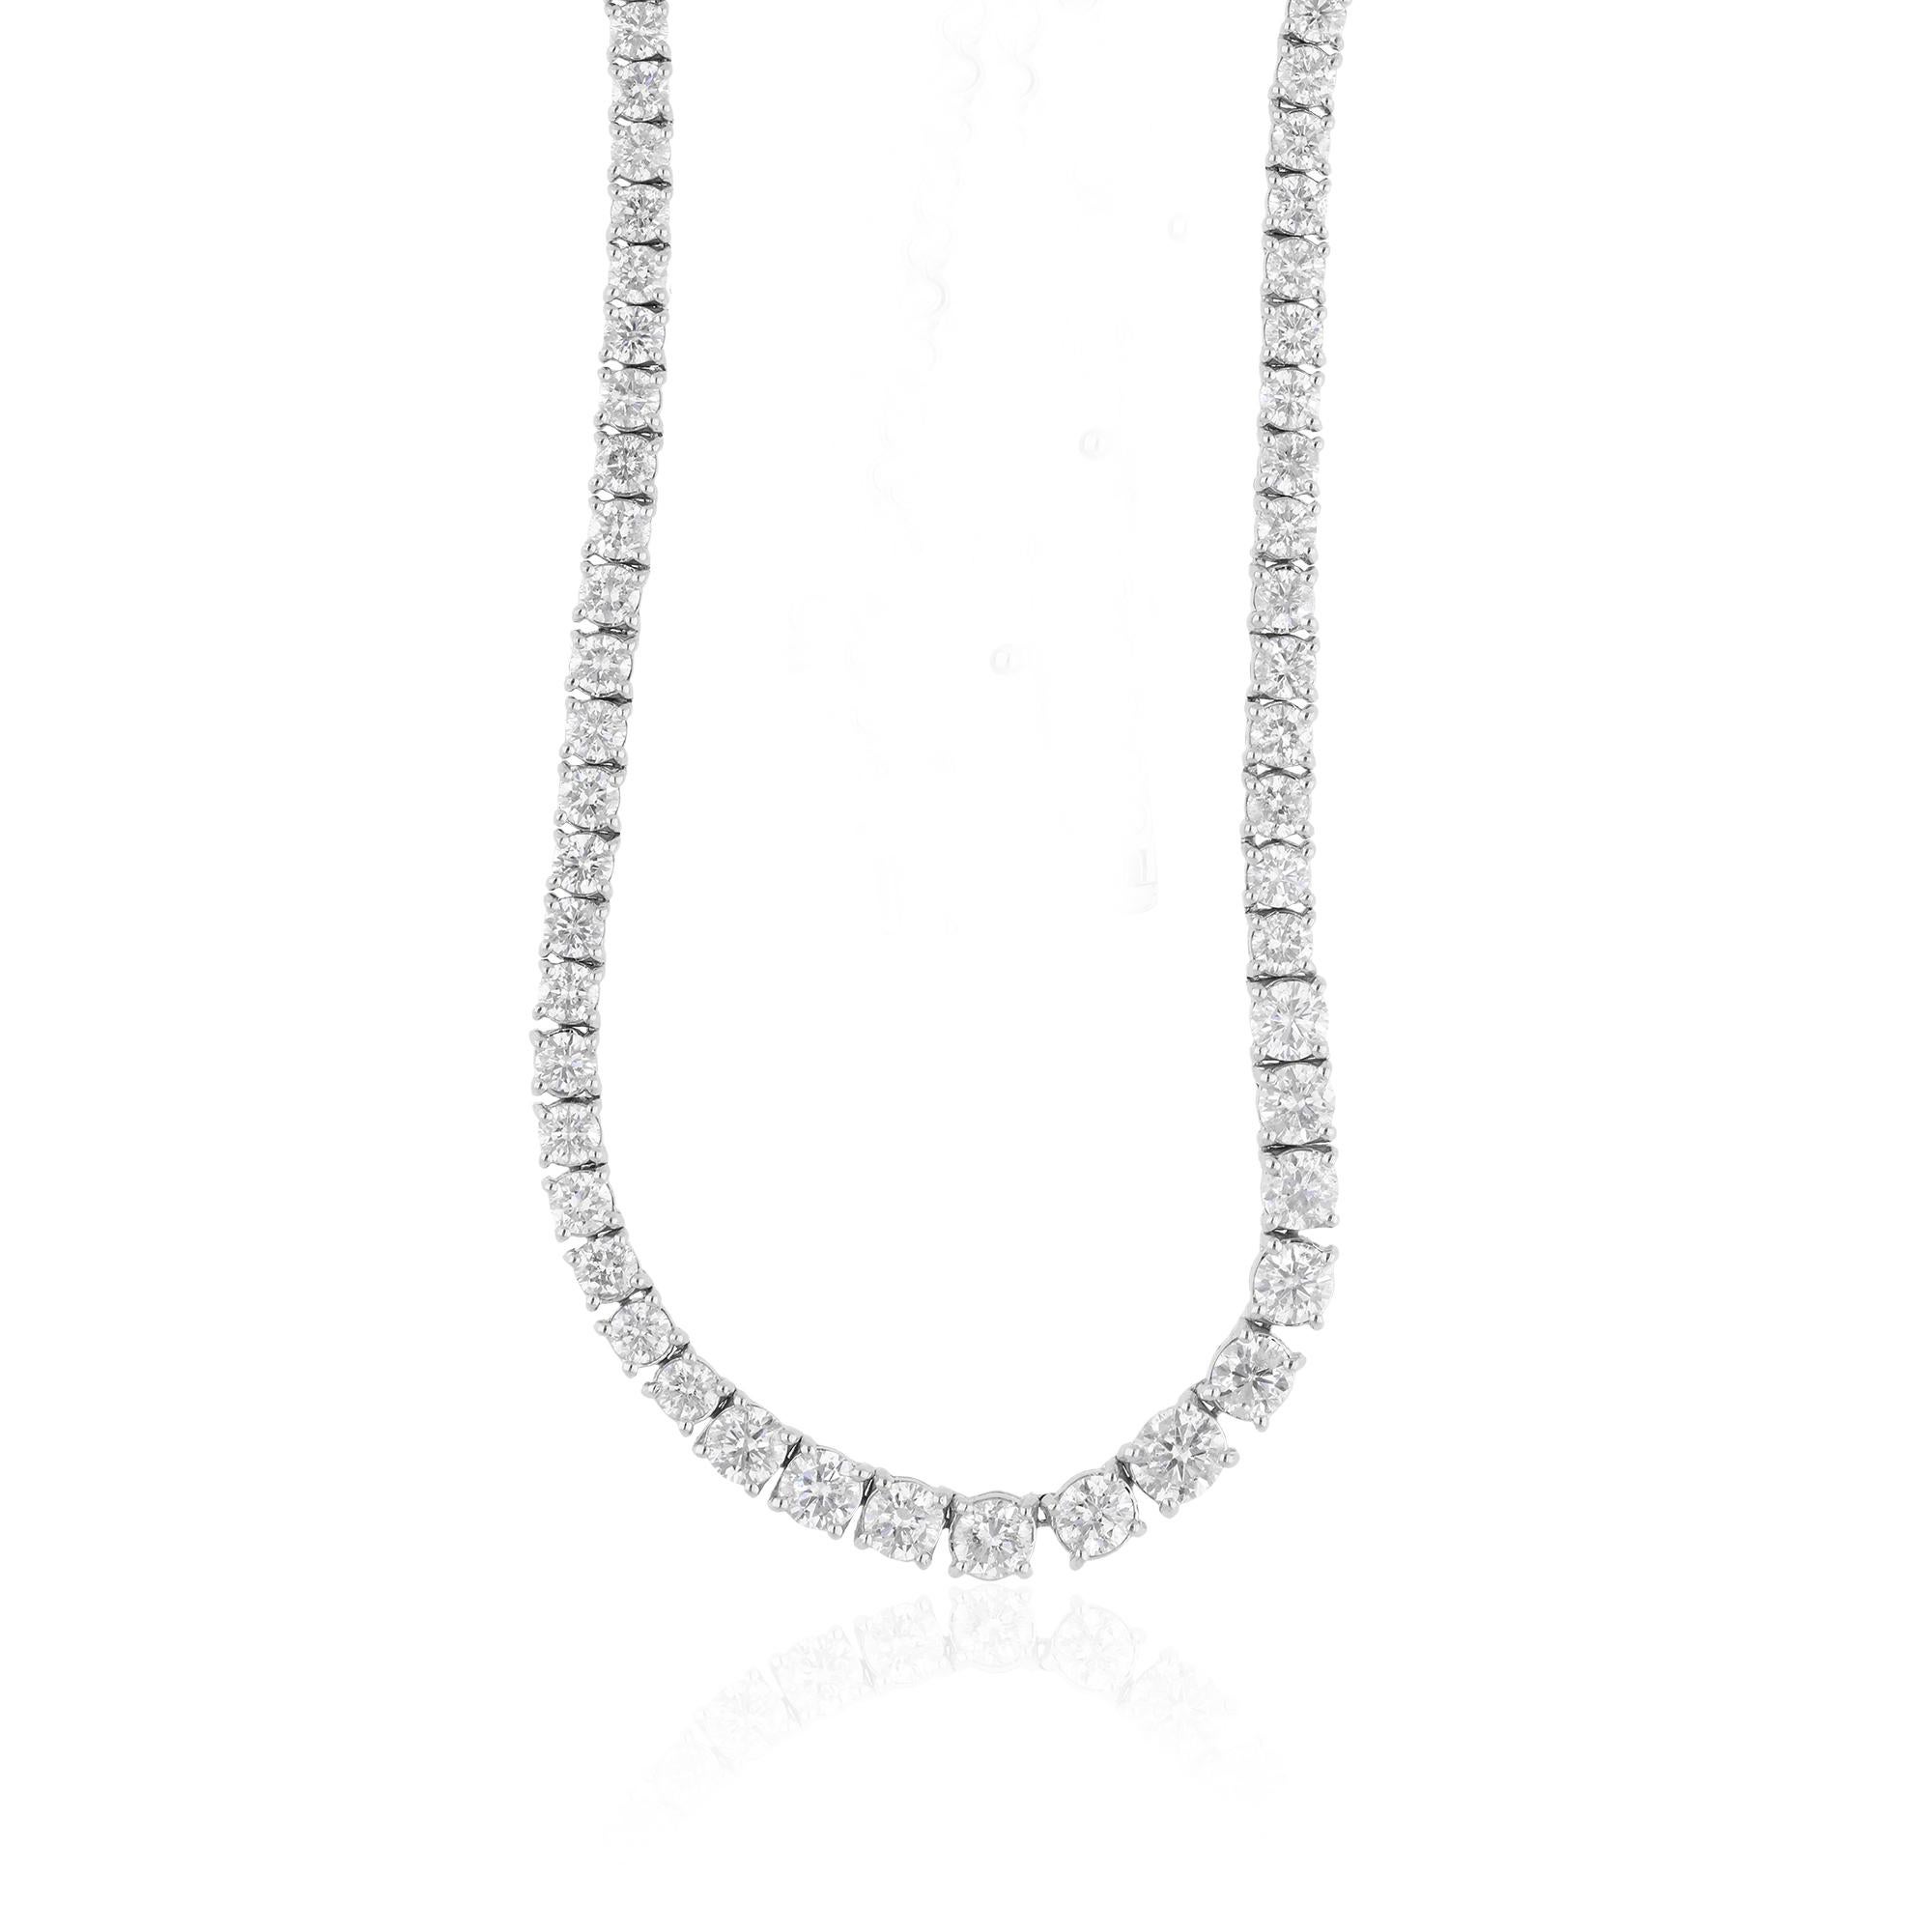 Women's Real 7.18 Carat SI Clarity HI Color Diamond Chain Necklace 14 Karat White Gold For Sale